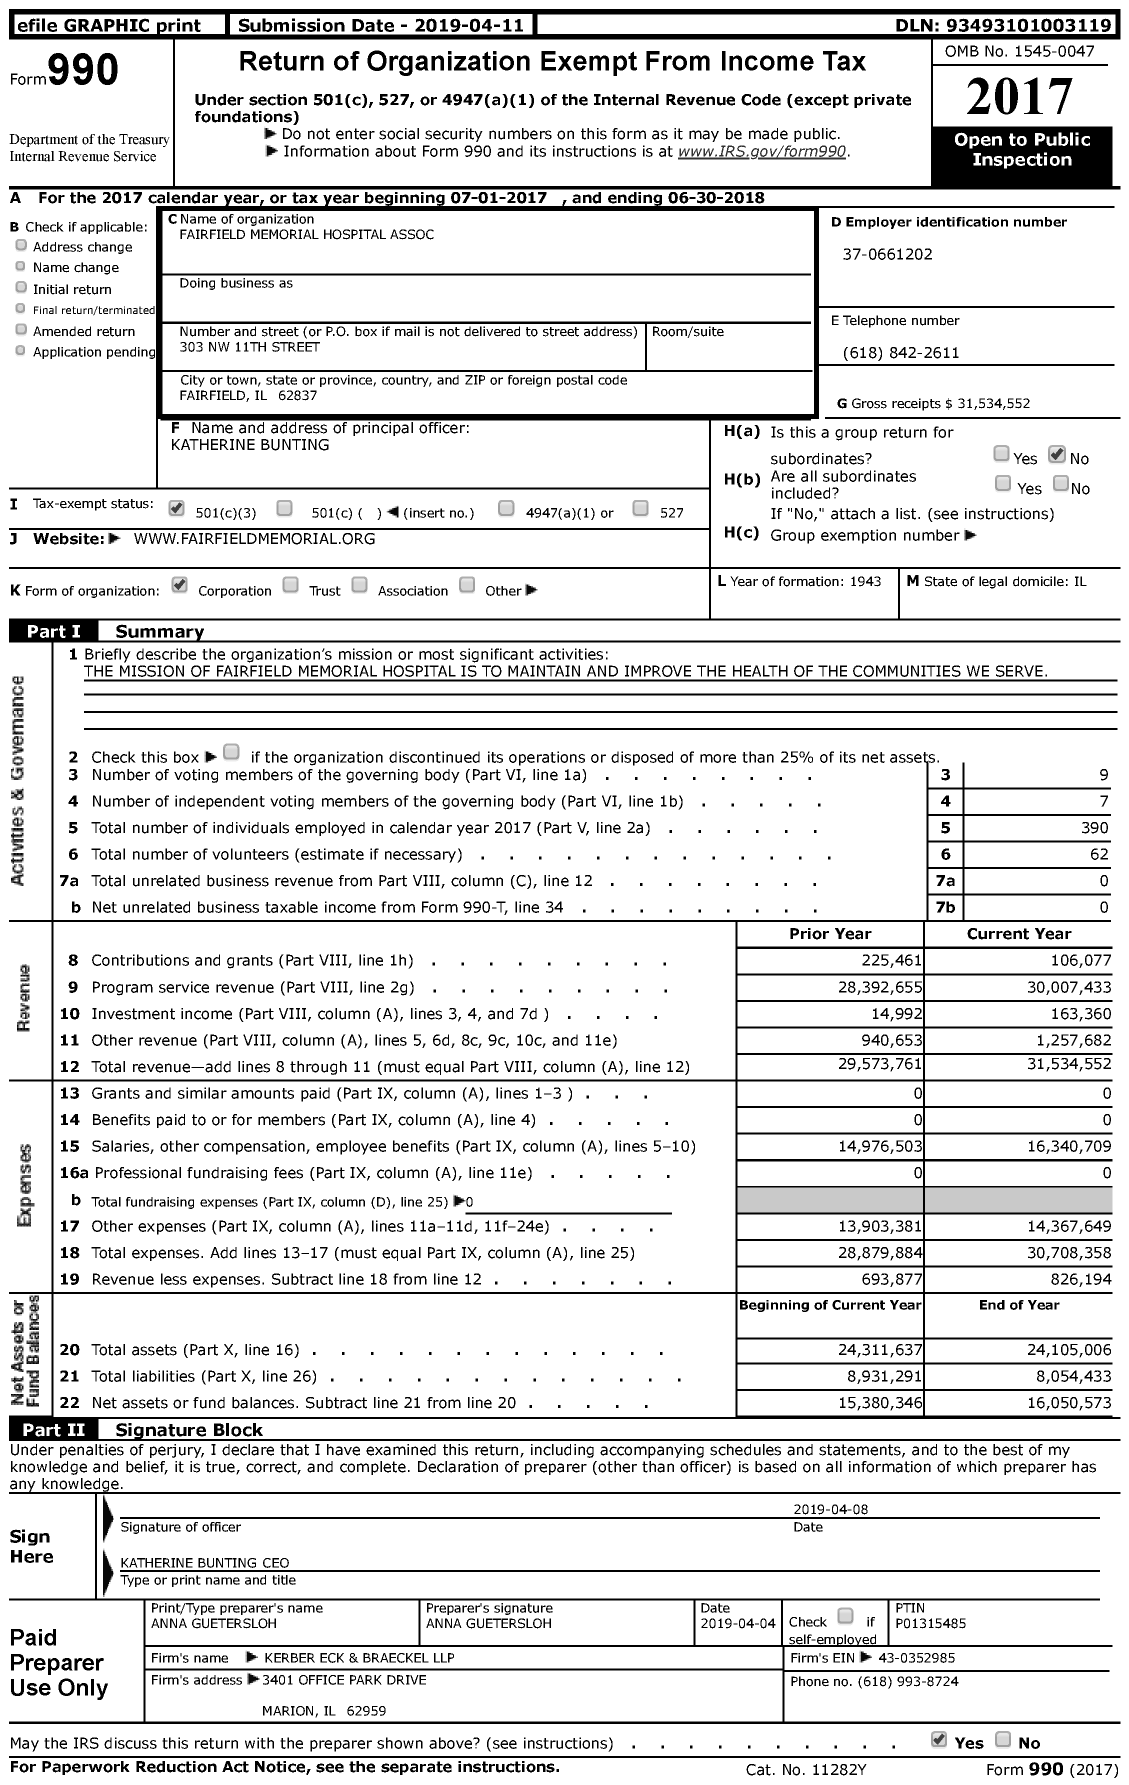 Image of first page of 2017 Form 990 for Fairfield Memorial Hospital (FMH)